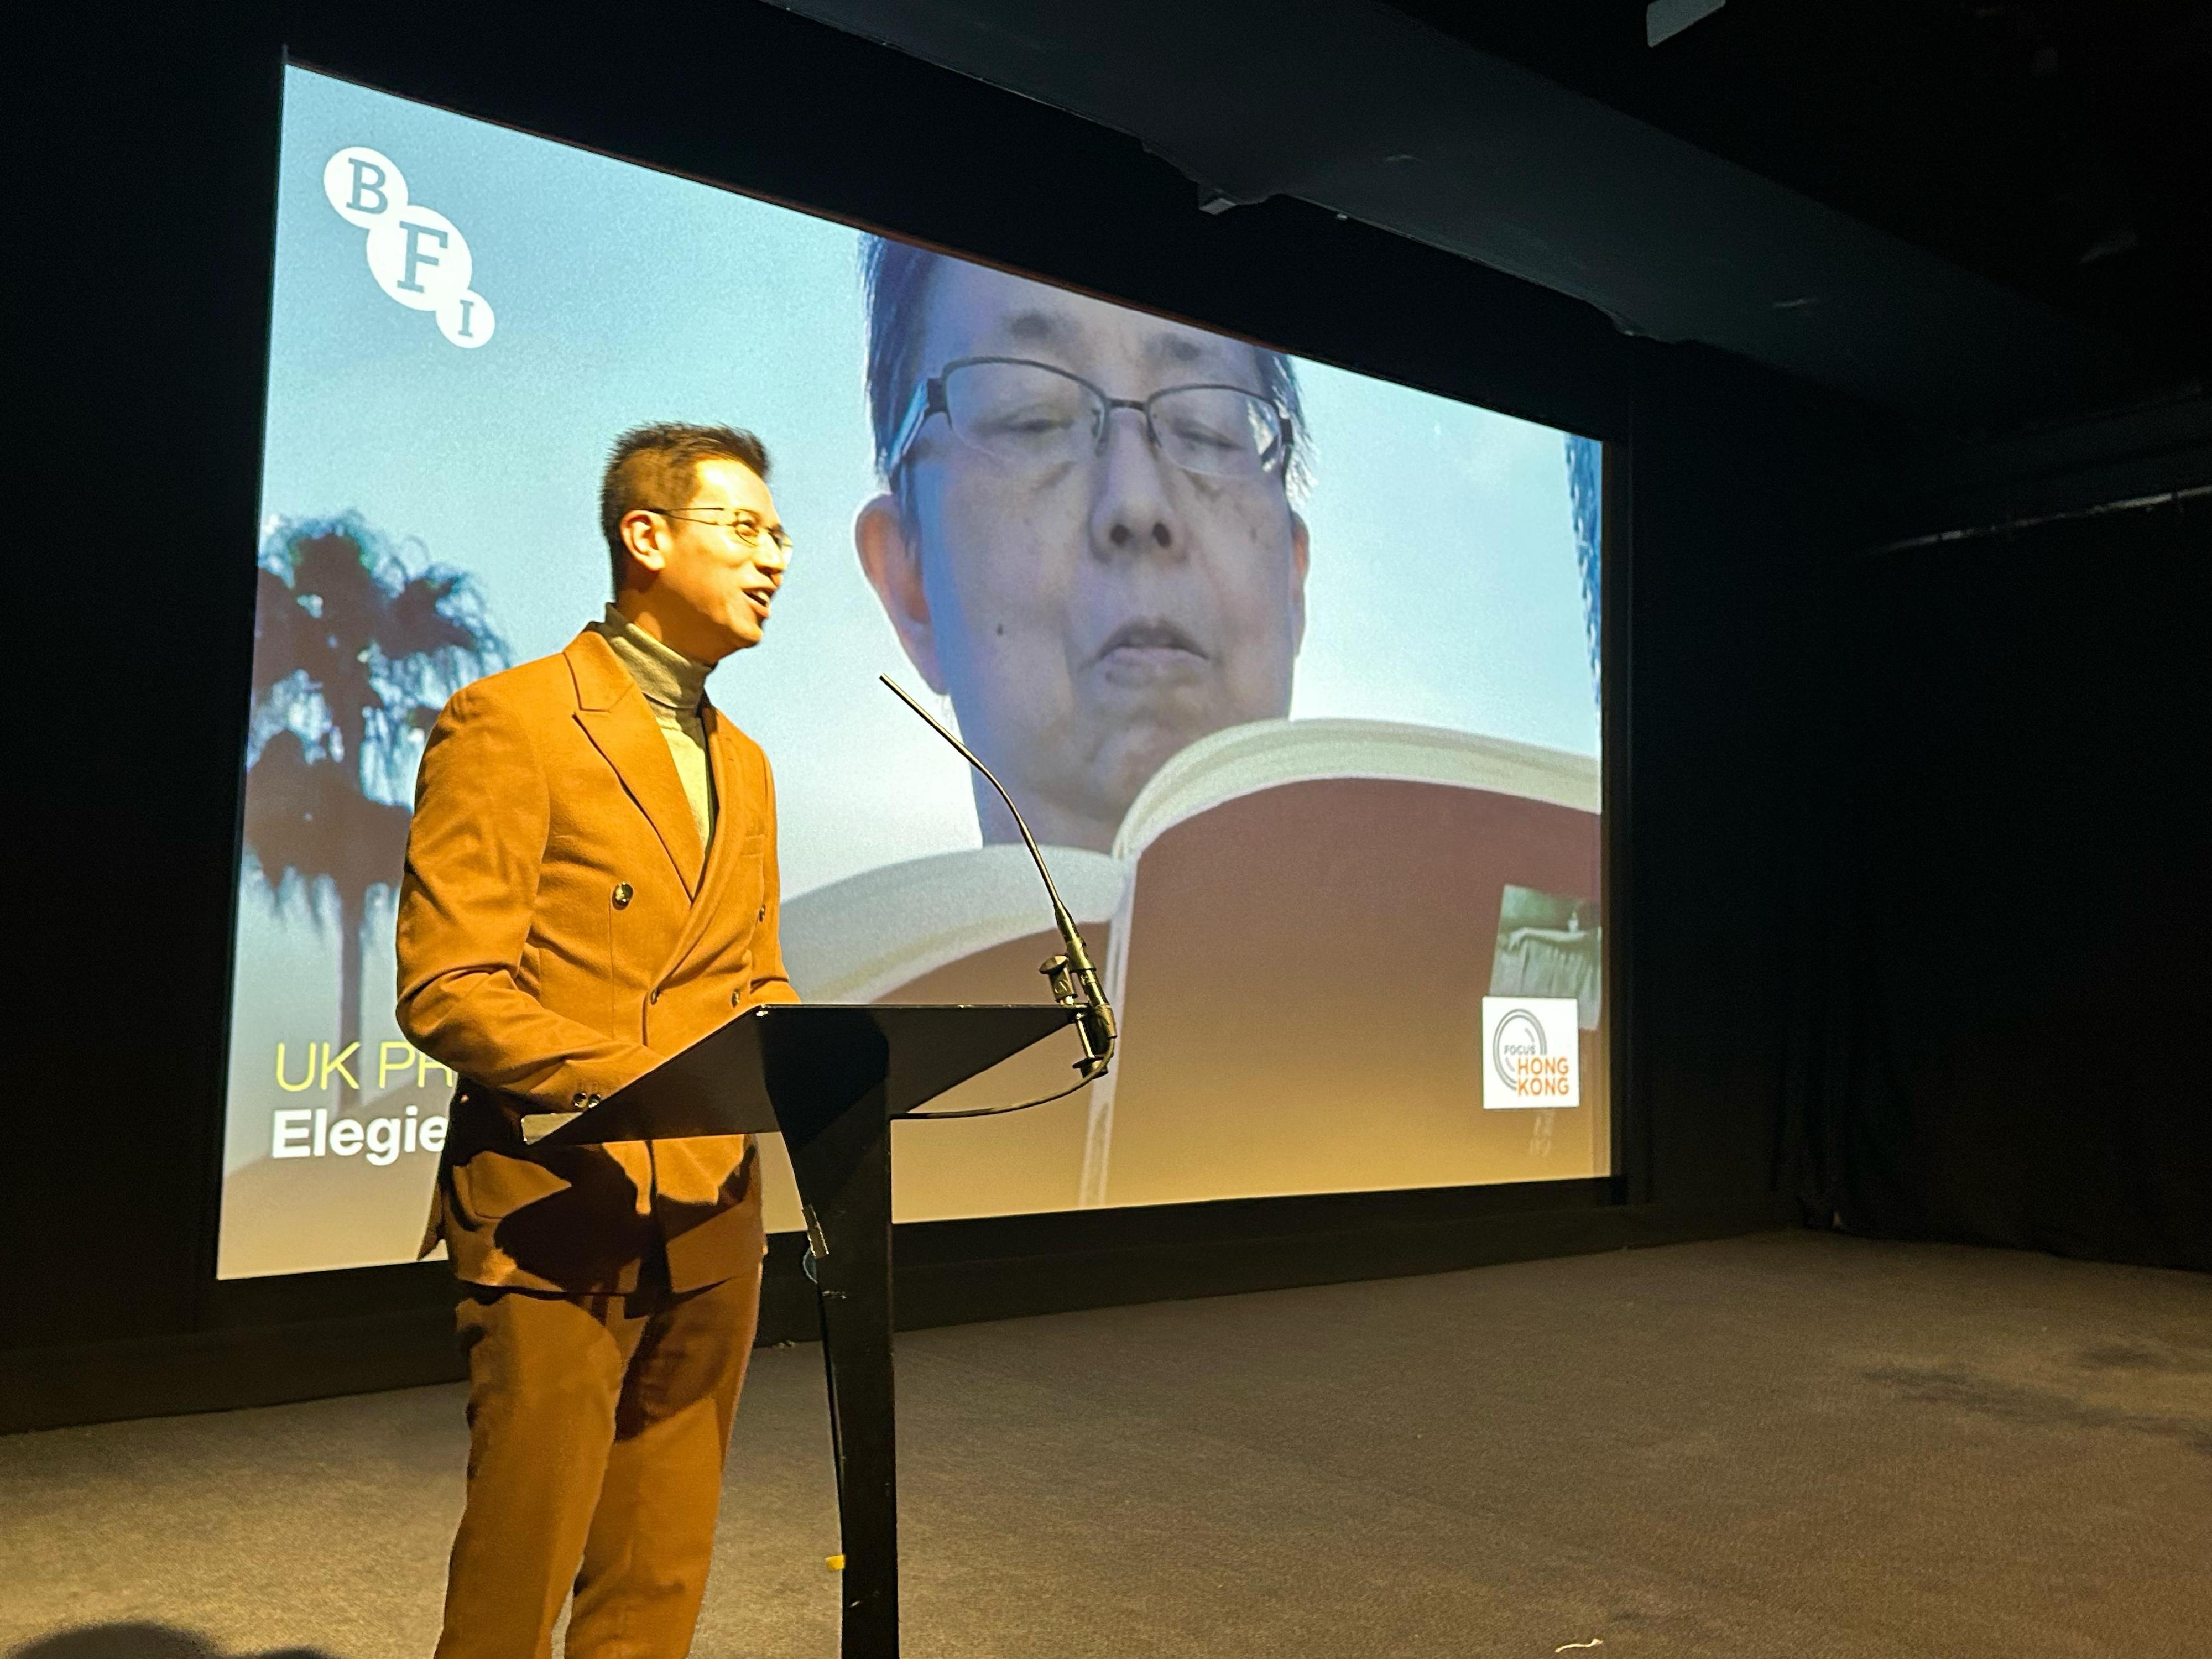 The Hong Kong Economic and Trade Office, London (London ETO) partnered with Focus Hong Kong to showcase a selection of Hong Kong films at the BFI Southbank in London on February 5 to 6 (London time) to embrace the Year of the Dragon. Photo shows the Director-General of the London ETO, Mr Gilford Law, addressing the audience at the opening screening.